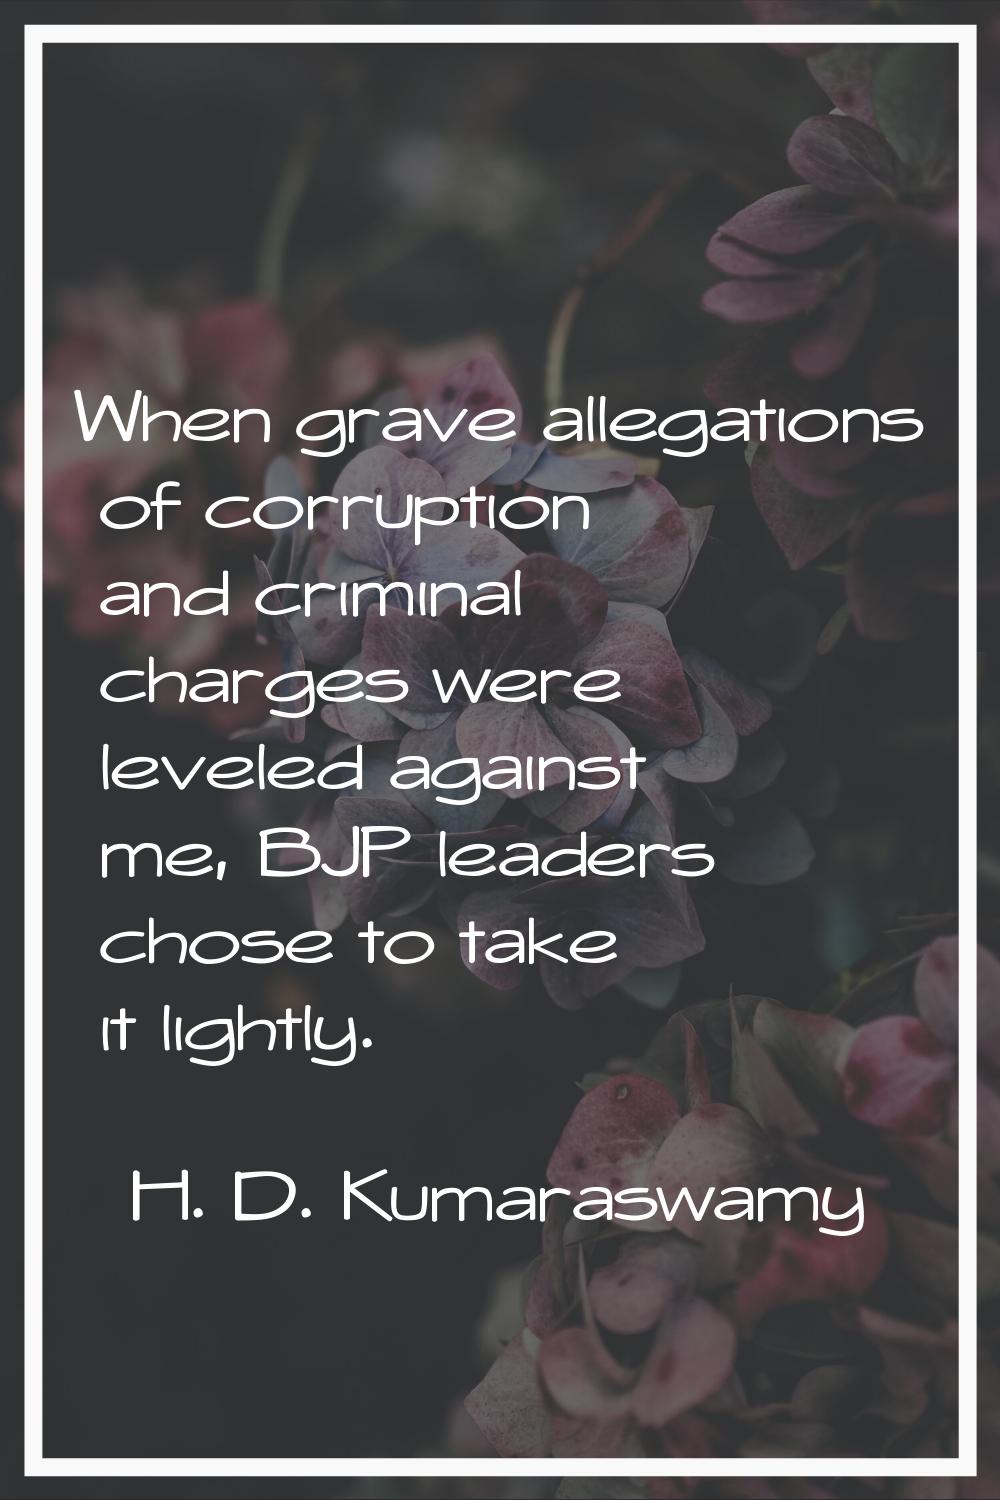 When grave allegations of corruption and criminal charges were leveled against me, BJP leaders chos